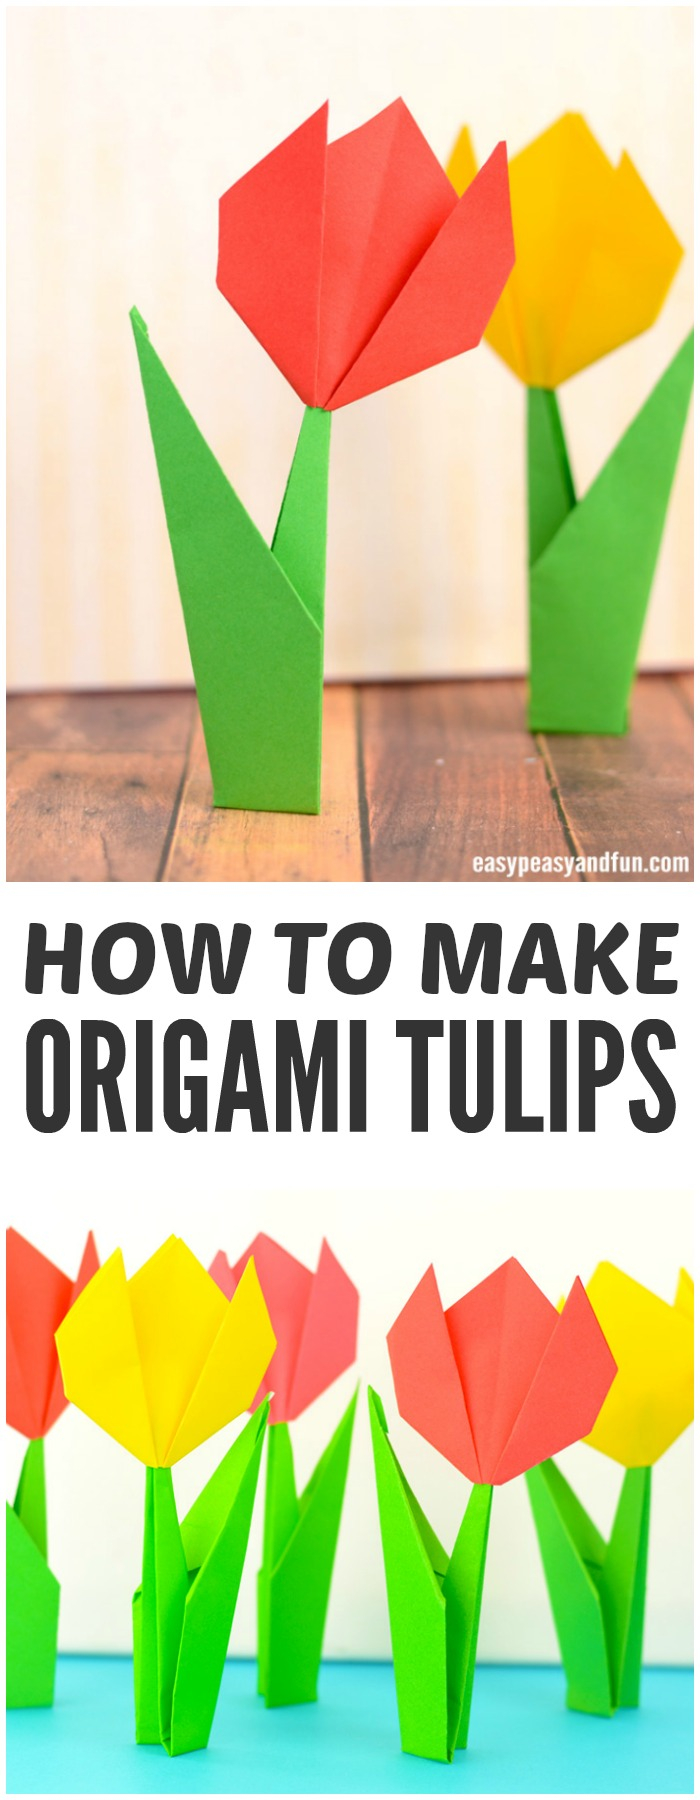 How To Make Flowers With Origami How To Make Origami Flowers Origami Tulip Tutorial With Diagram